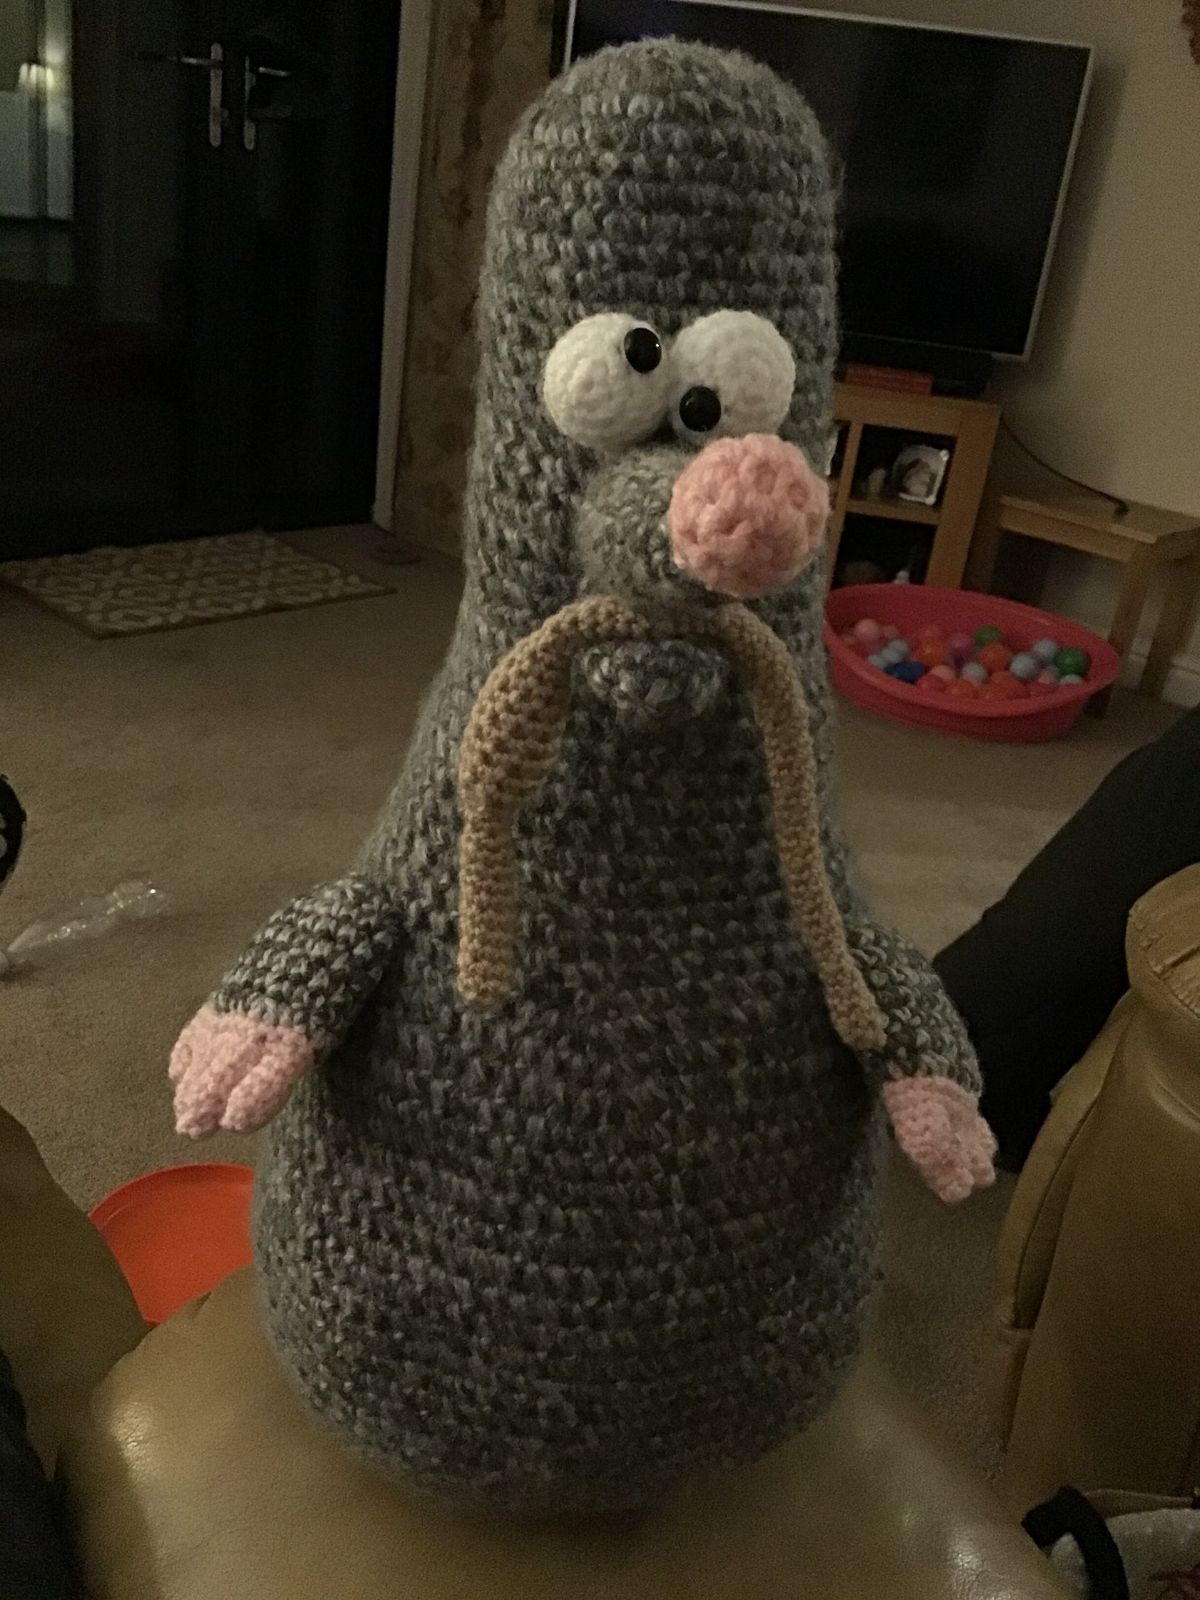 Mole Crochet Pattern Amigurumi Doorstopper Review for Cottontail and Whiskers by Debbie Jackson